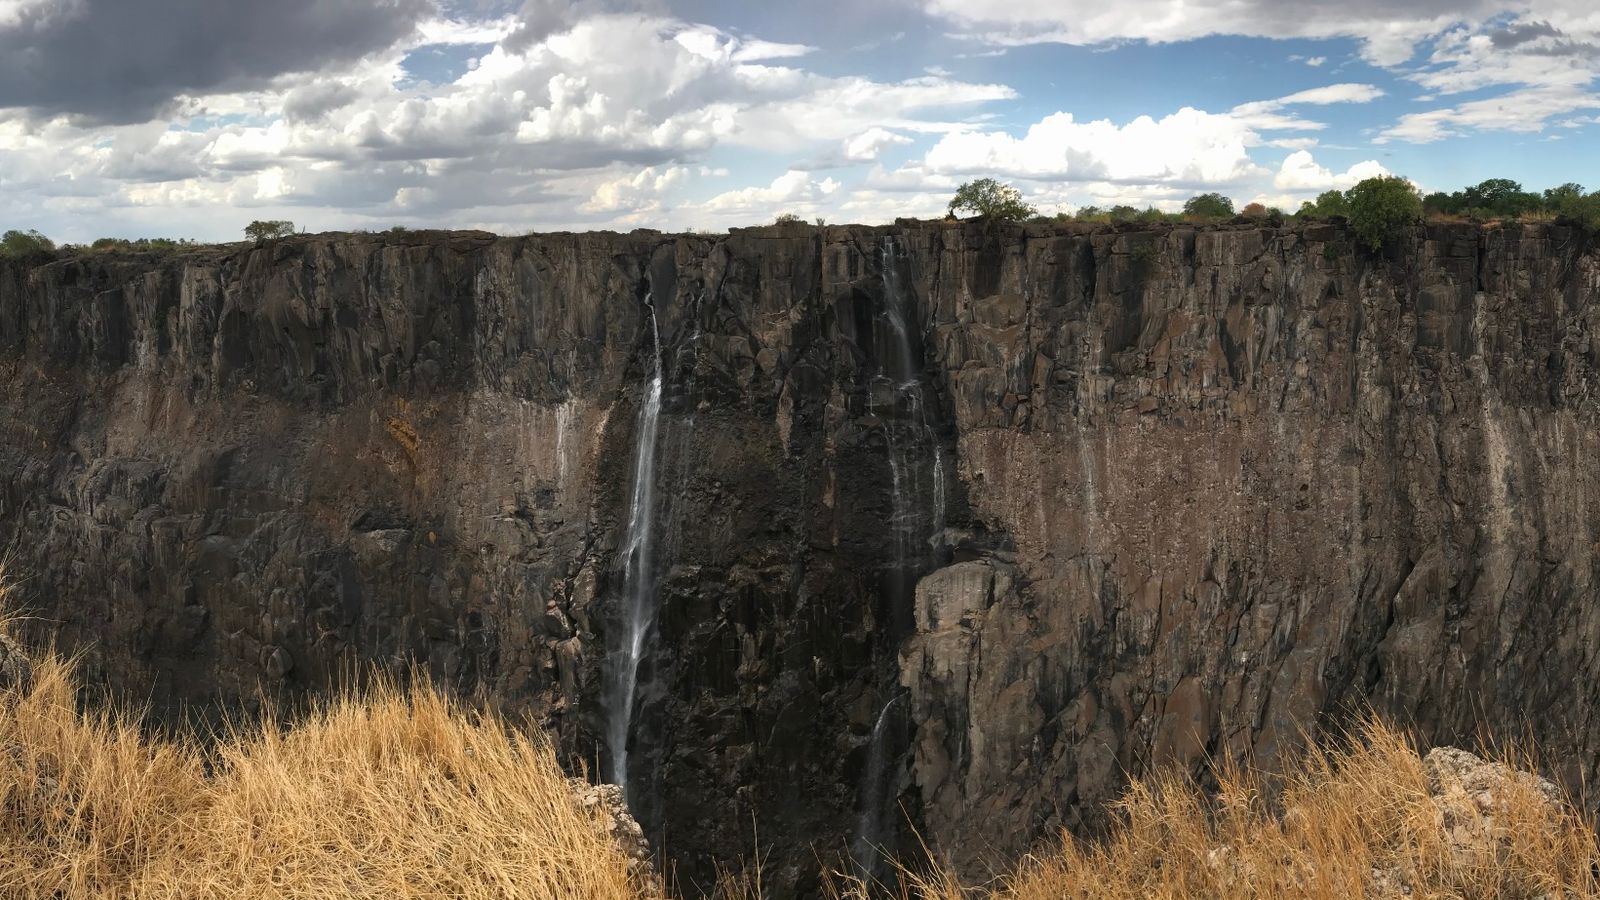 Climate change: Drought cuts Victoria Falls to lowest level in 25 years - Sky News